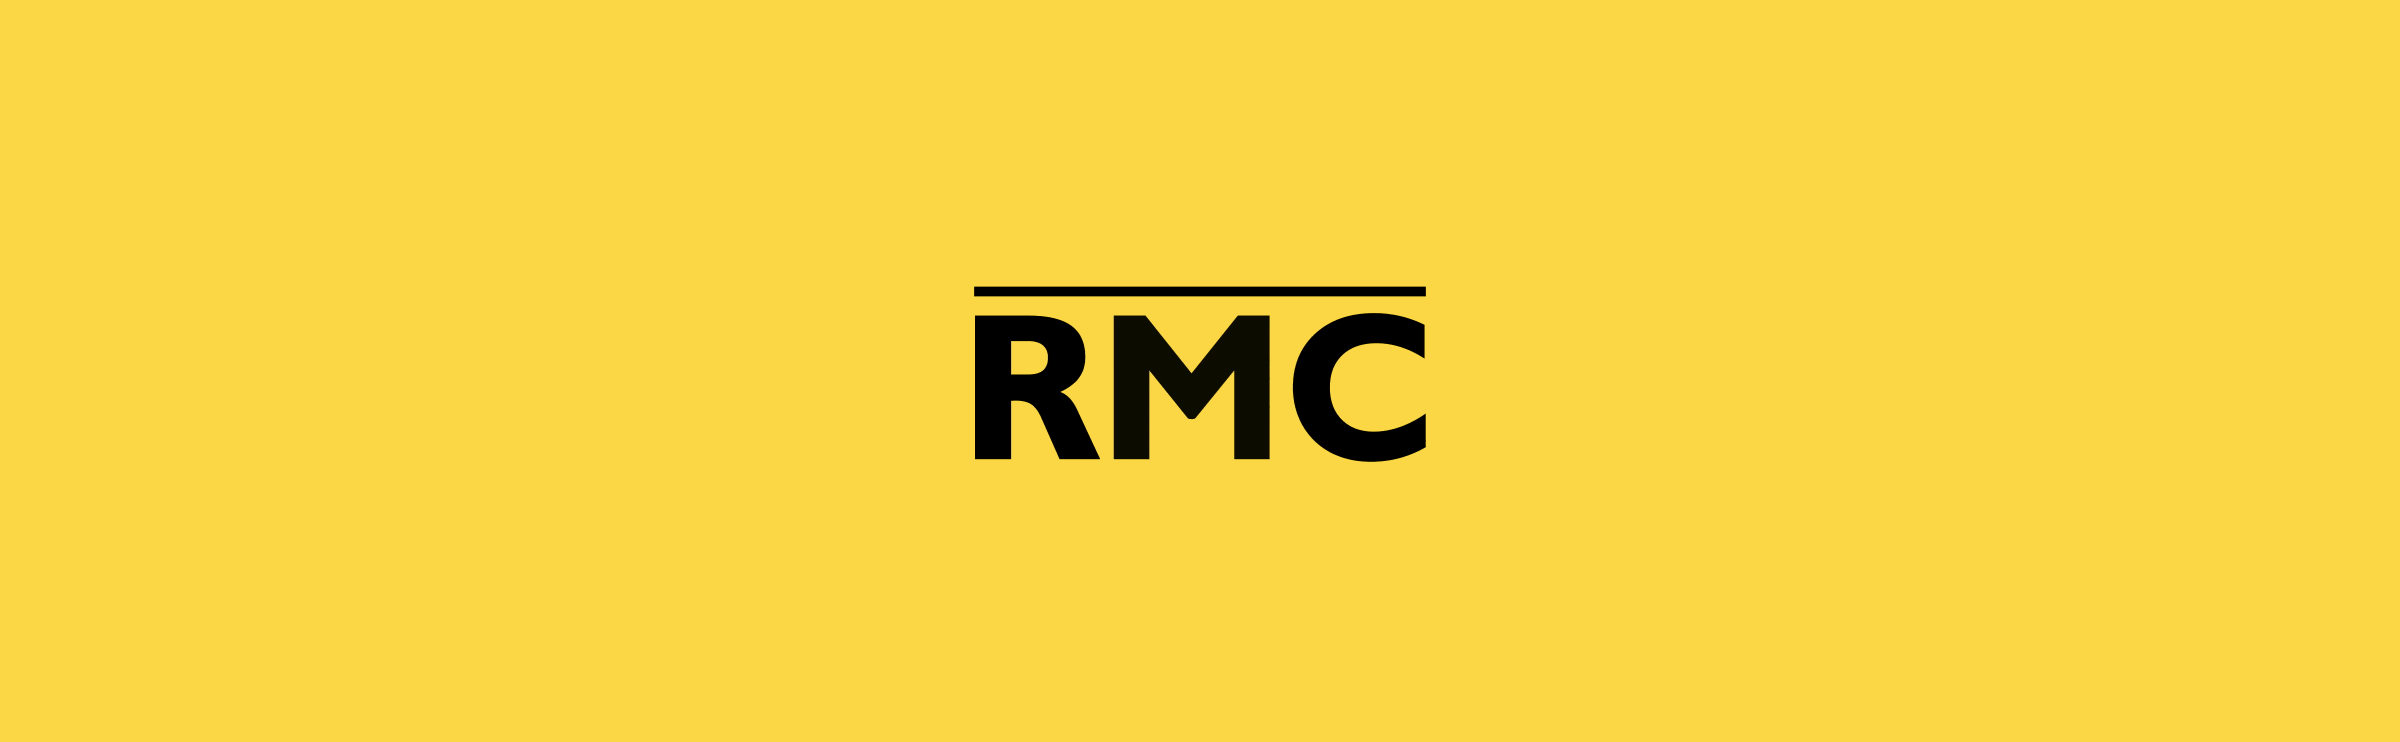 Rick Miller acquisition announcement an animation of Motion logo acquiring RMC logo